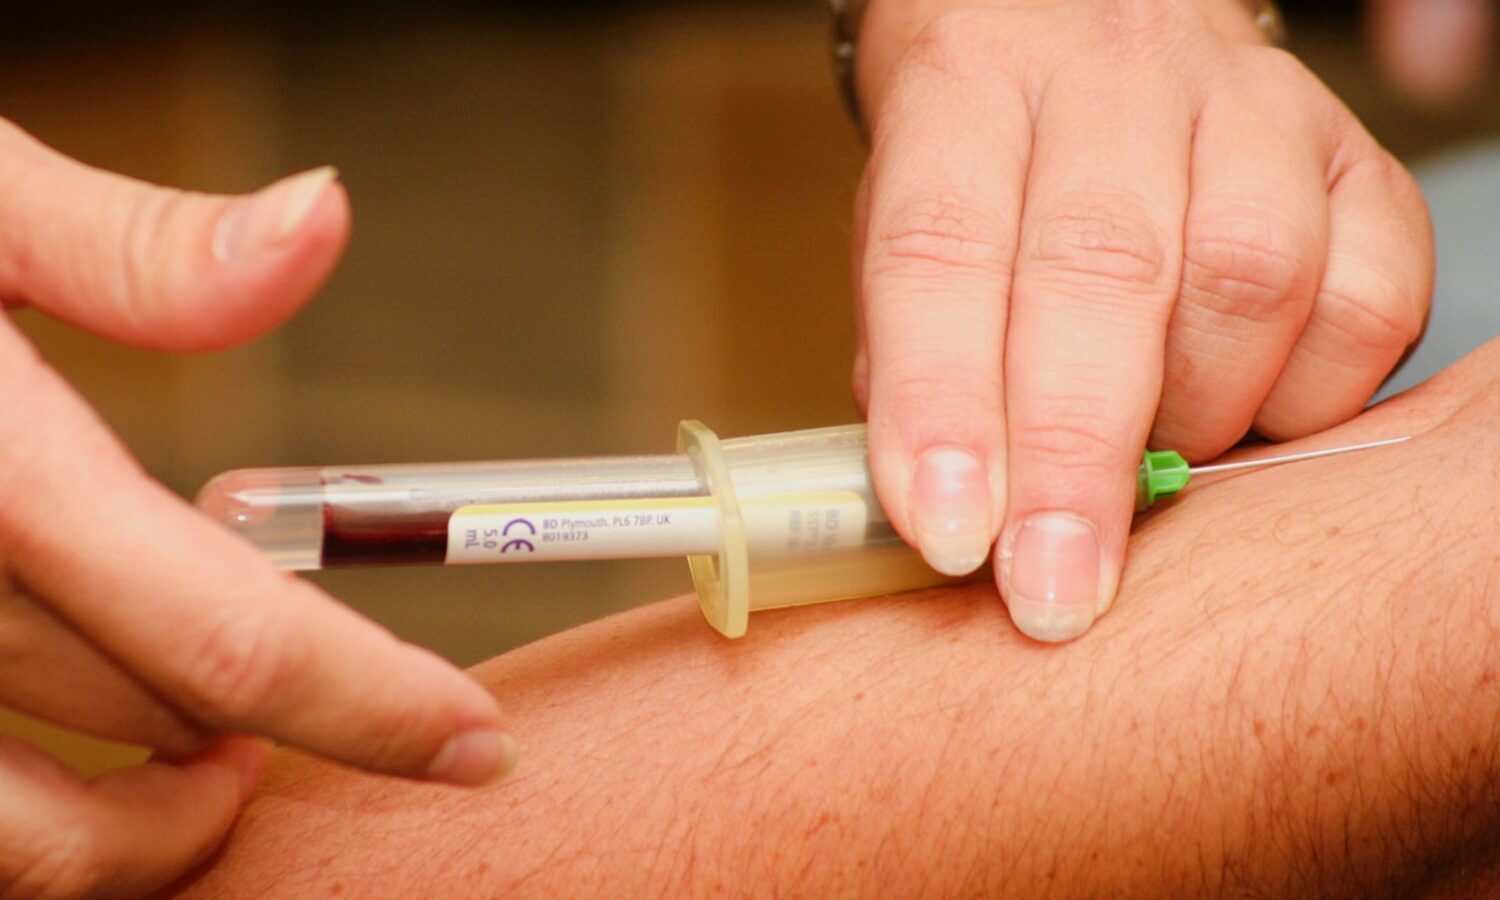 New Blood Test May Predict A Variety Of Dangerous Conditions